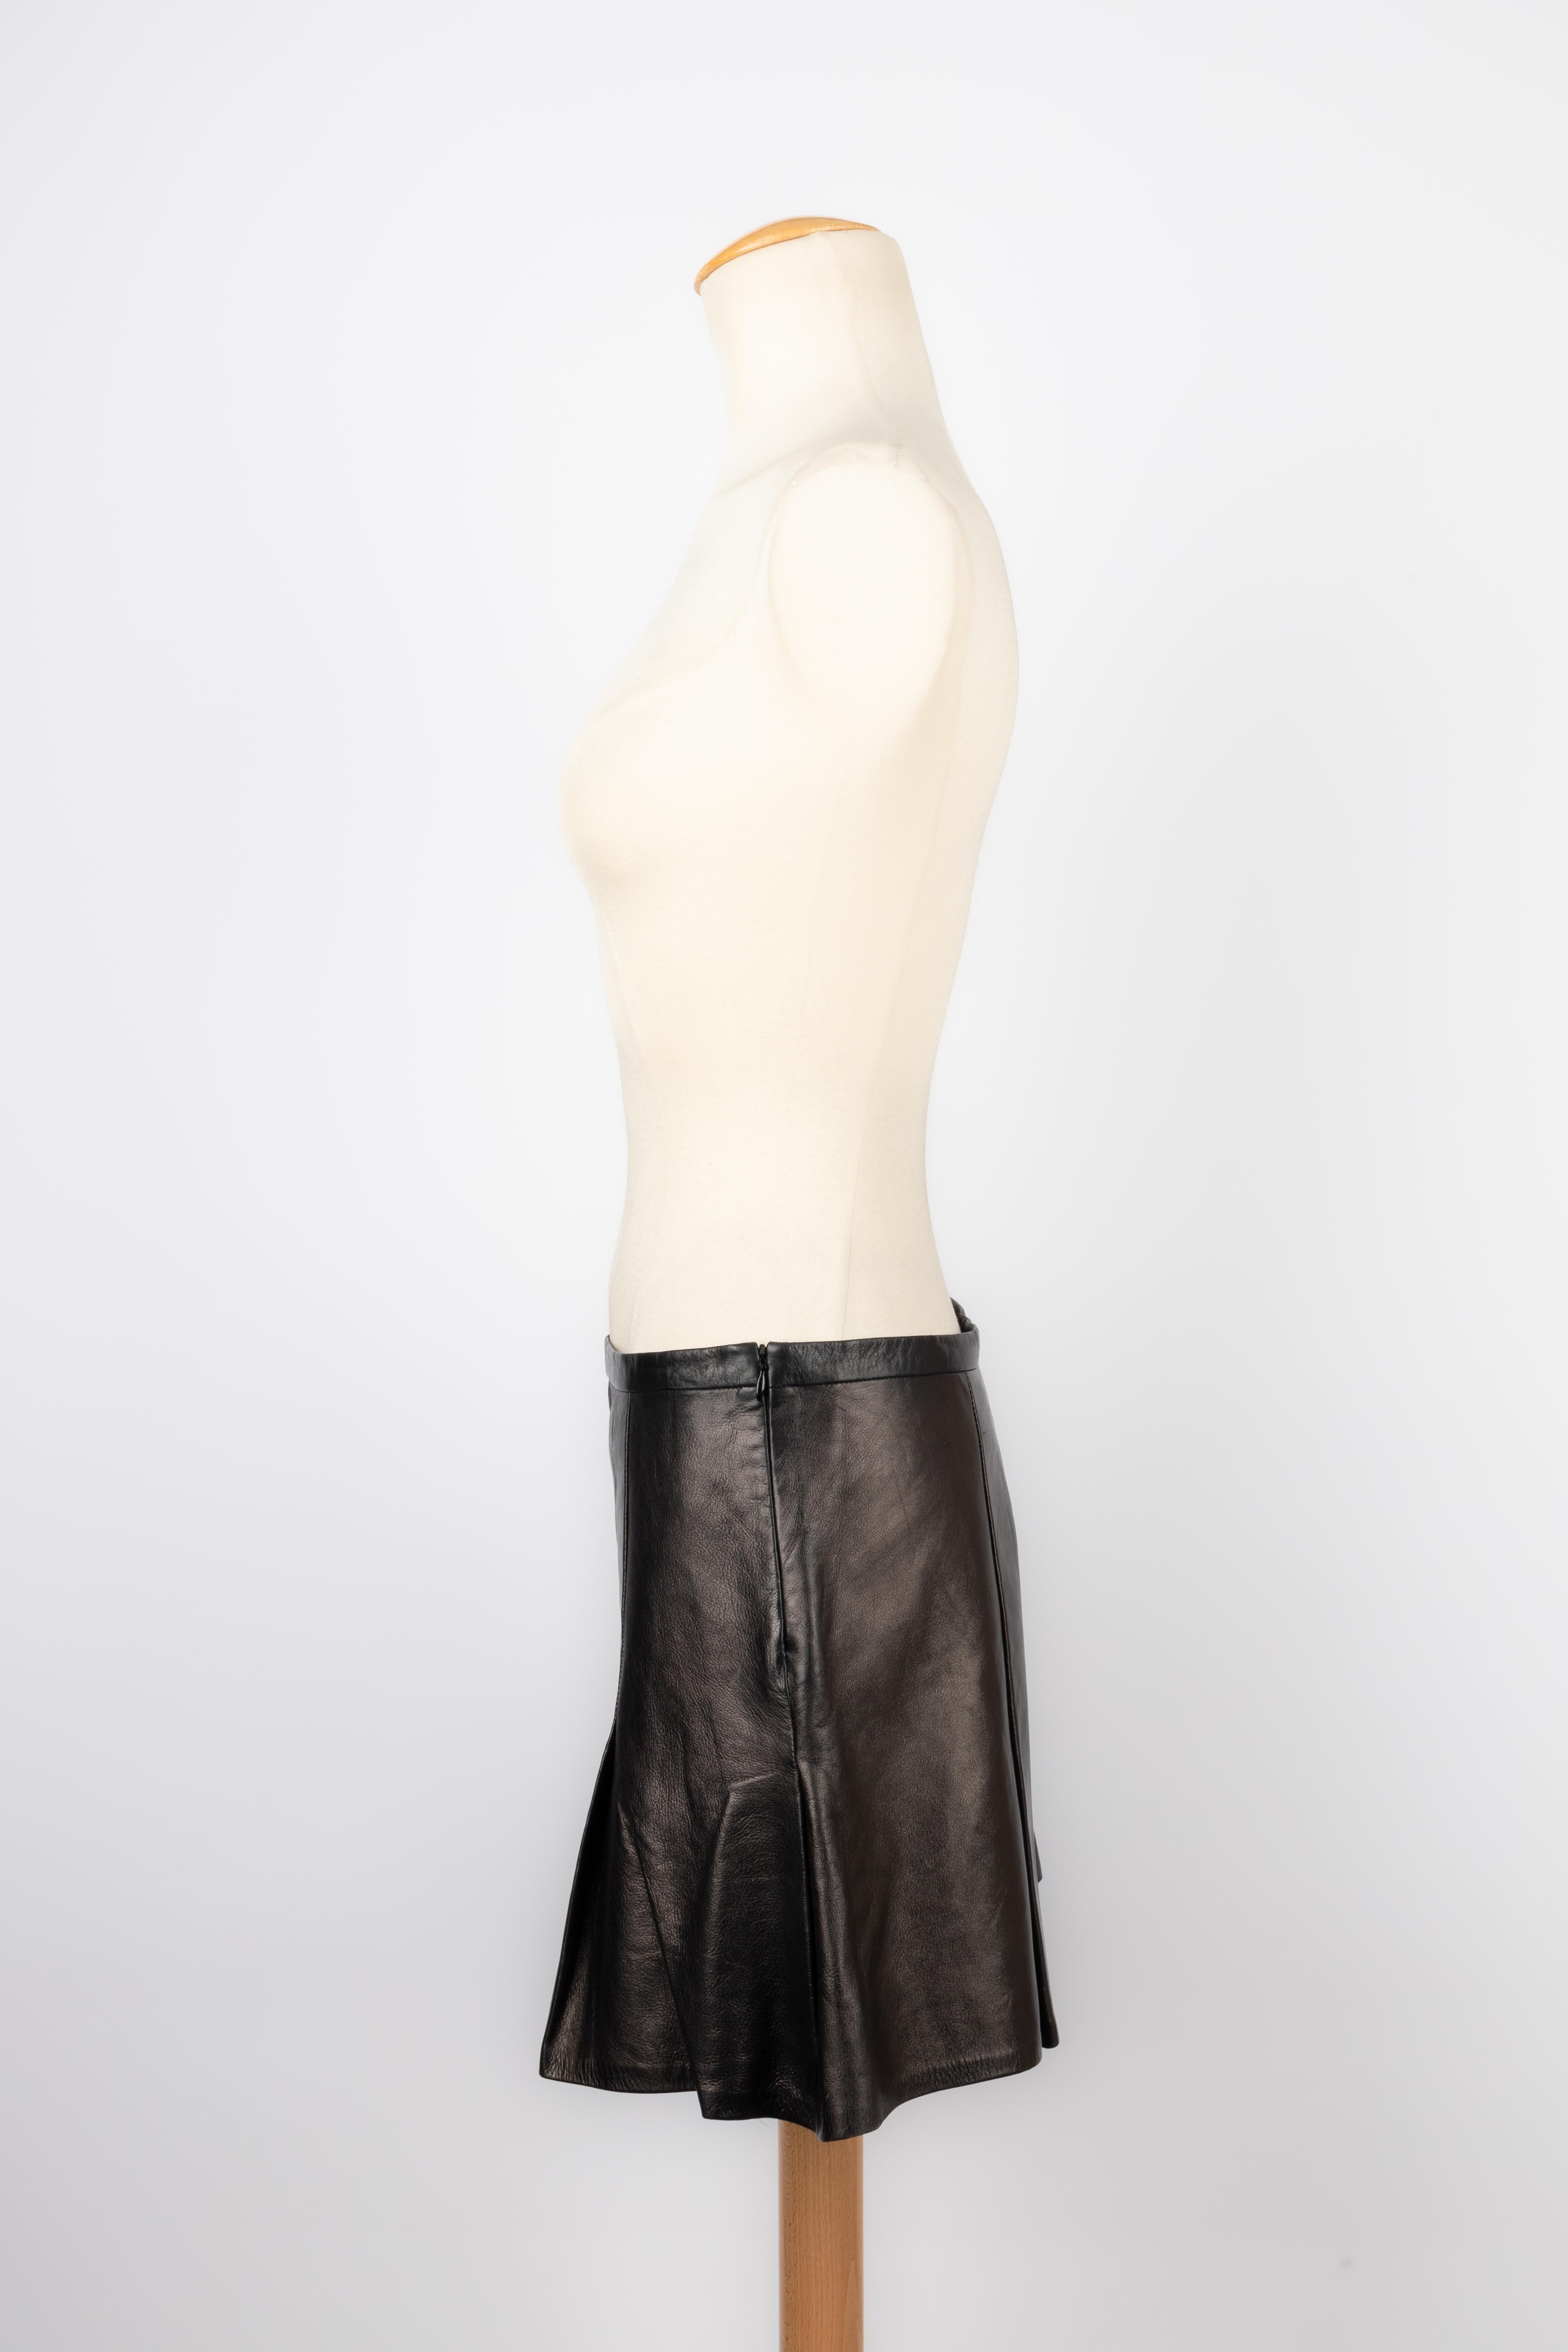 Pucci leather shorts For Sale 2